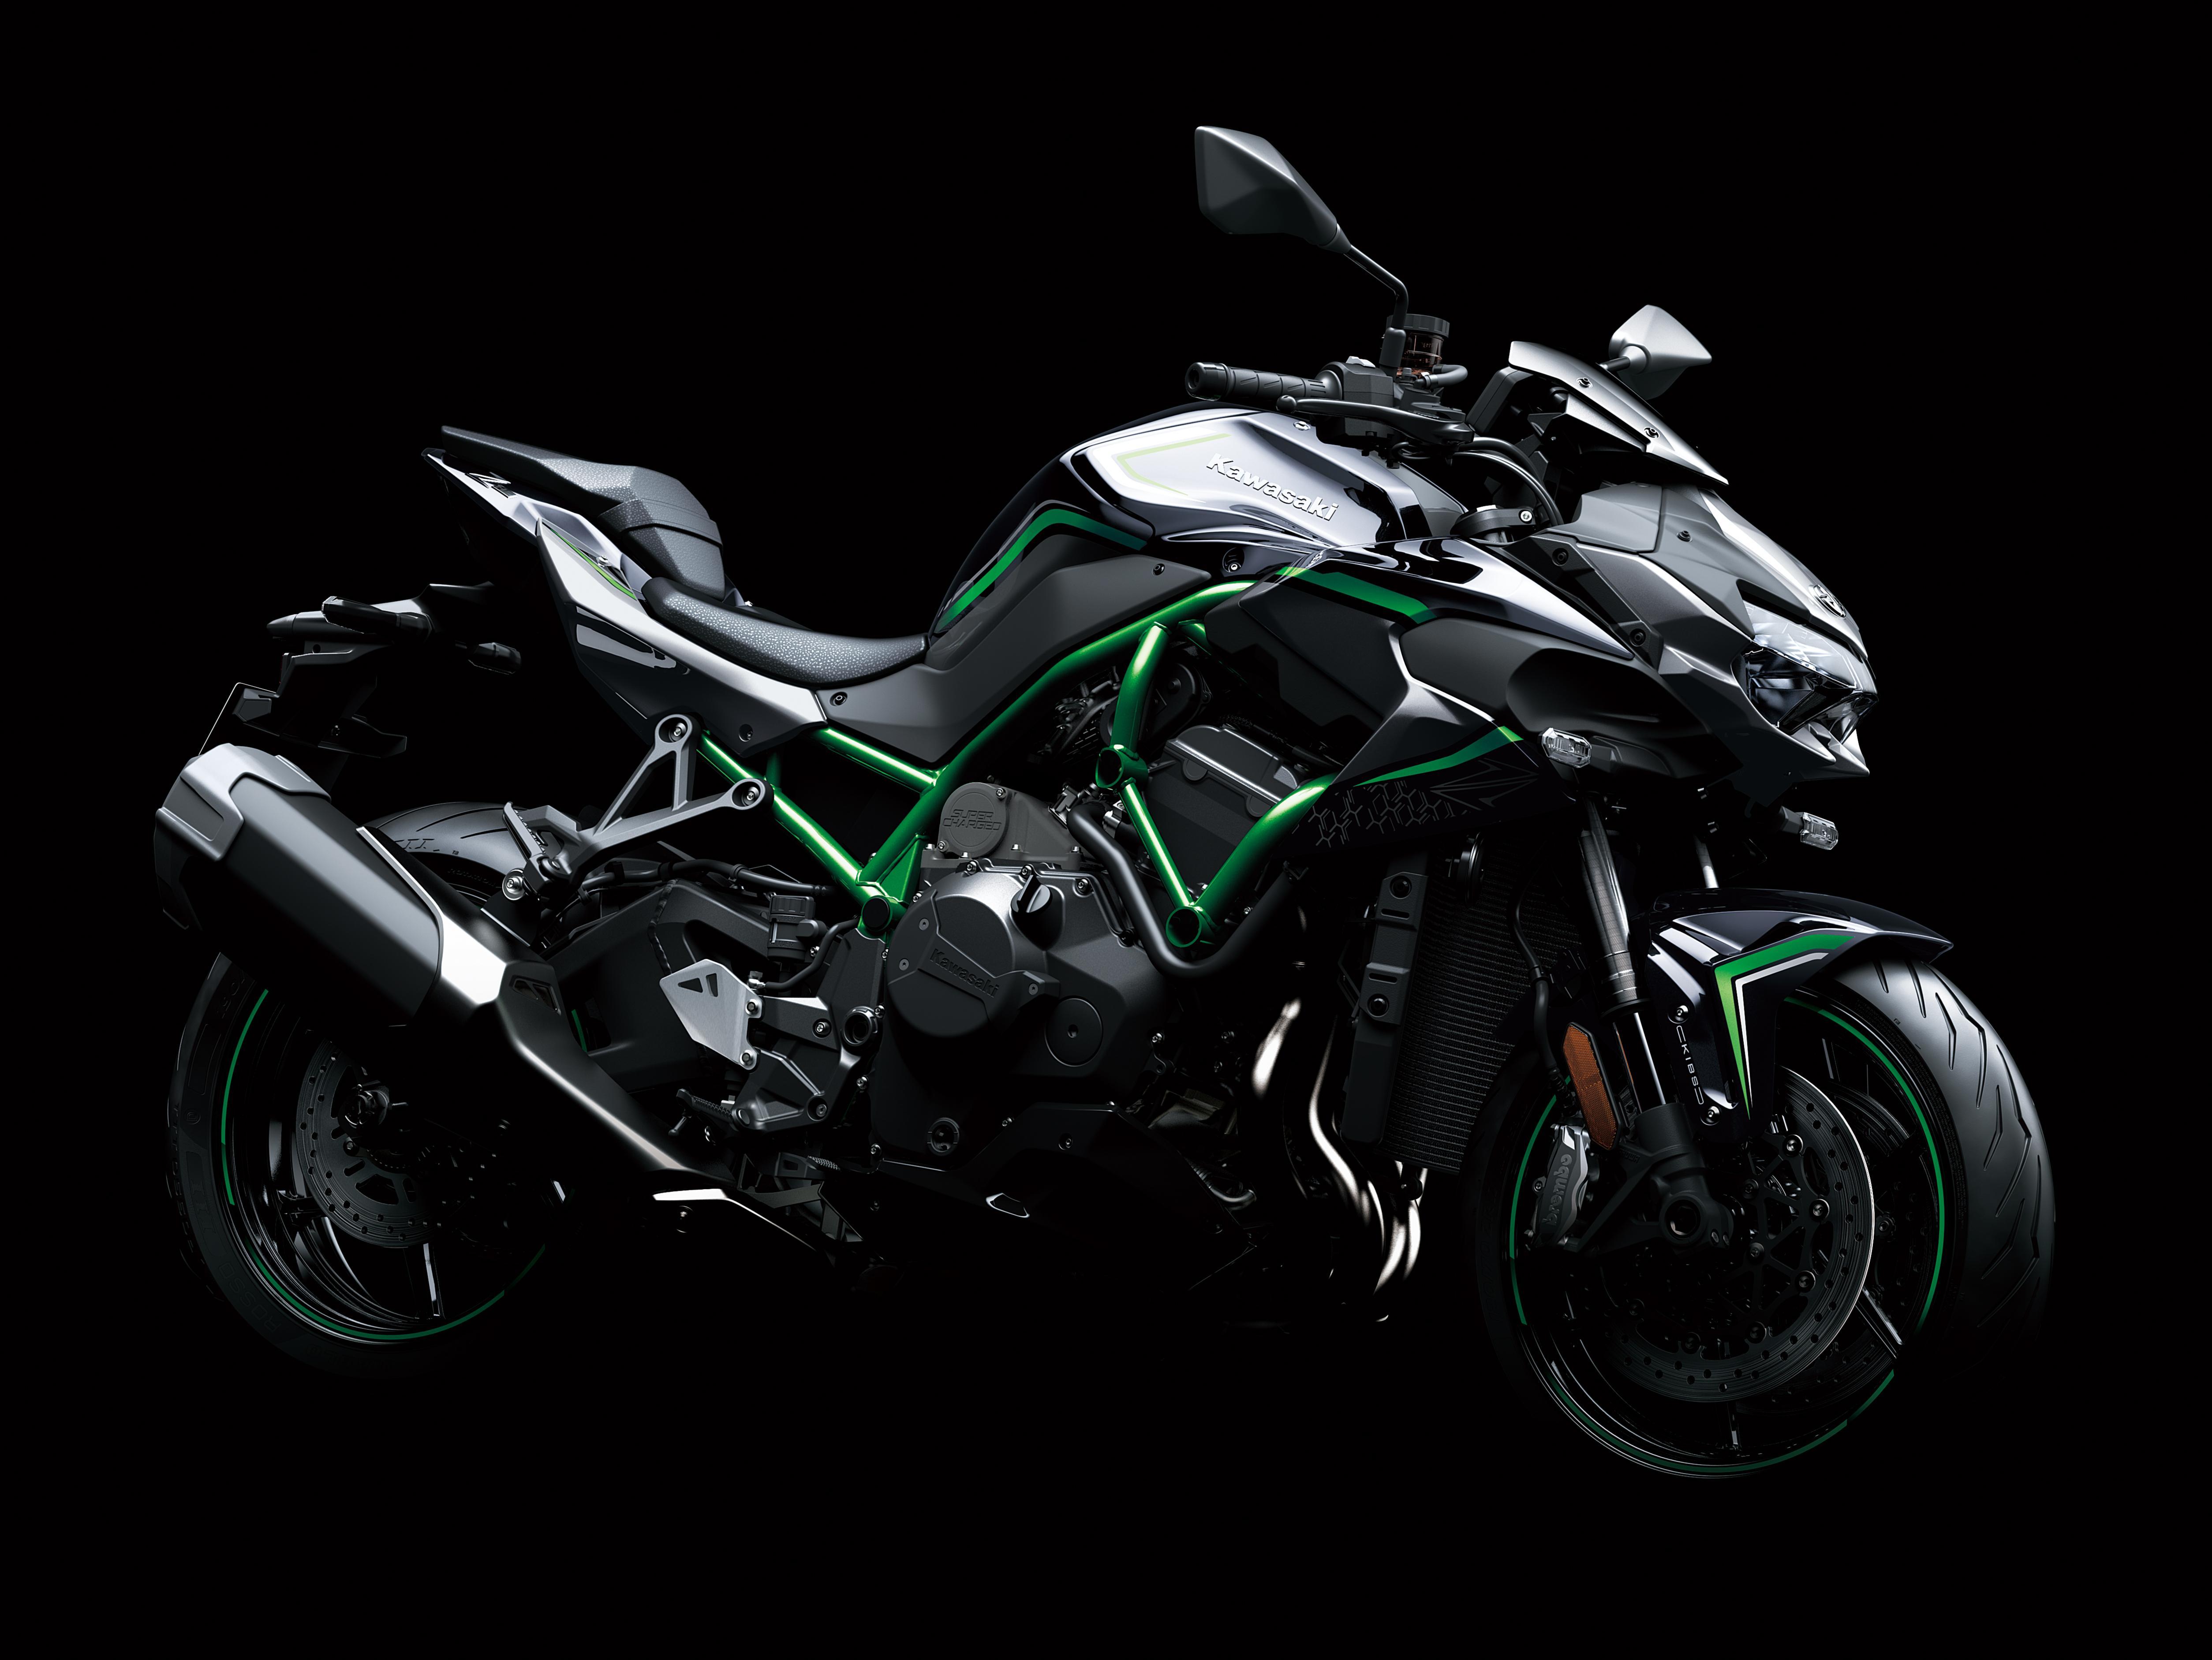 Tokyo Motor Show: Kawasaki Z H2 and new W800 unveiled